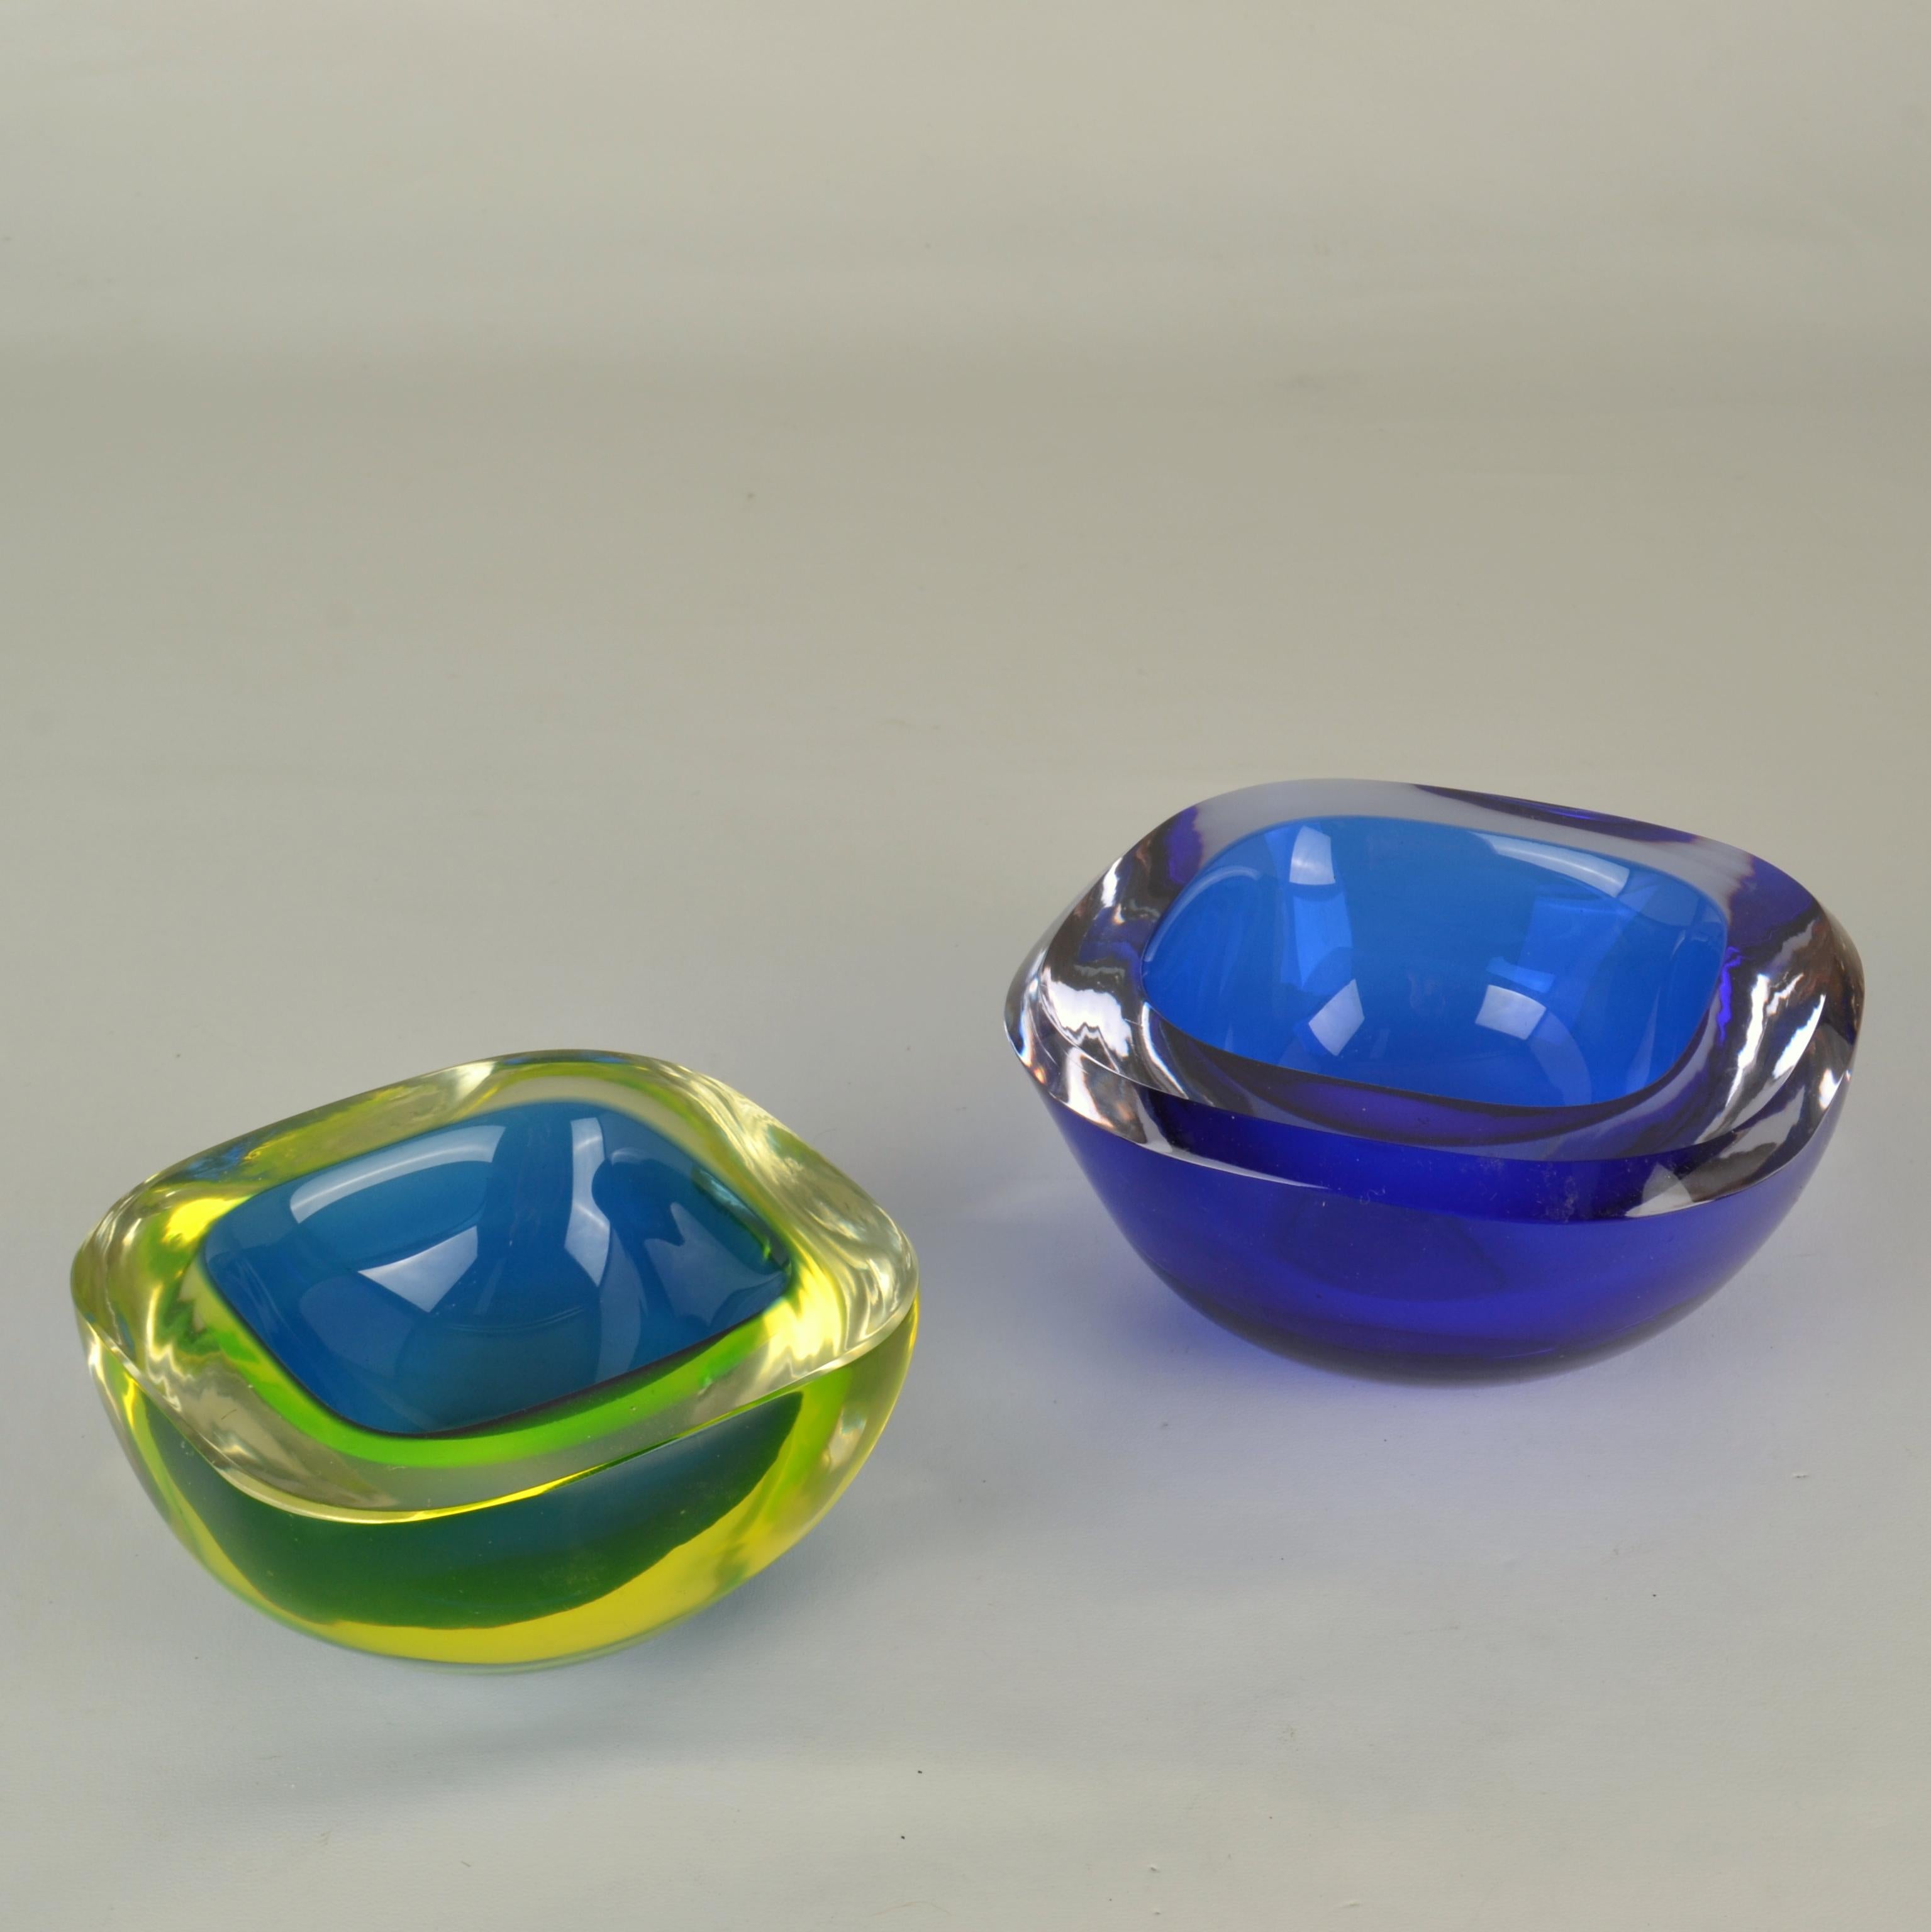 Glass bowls square shape by Flavio Poli for Seguso 1960s in deep blue. The bowls are hand blown, known as Venetian Sommerso, made in Murano, Venice, Italy. 
The bowls a combination of deep blue and acid yellor (which is rare) encased in clear